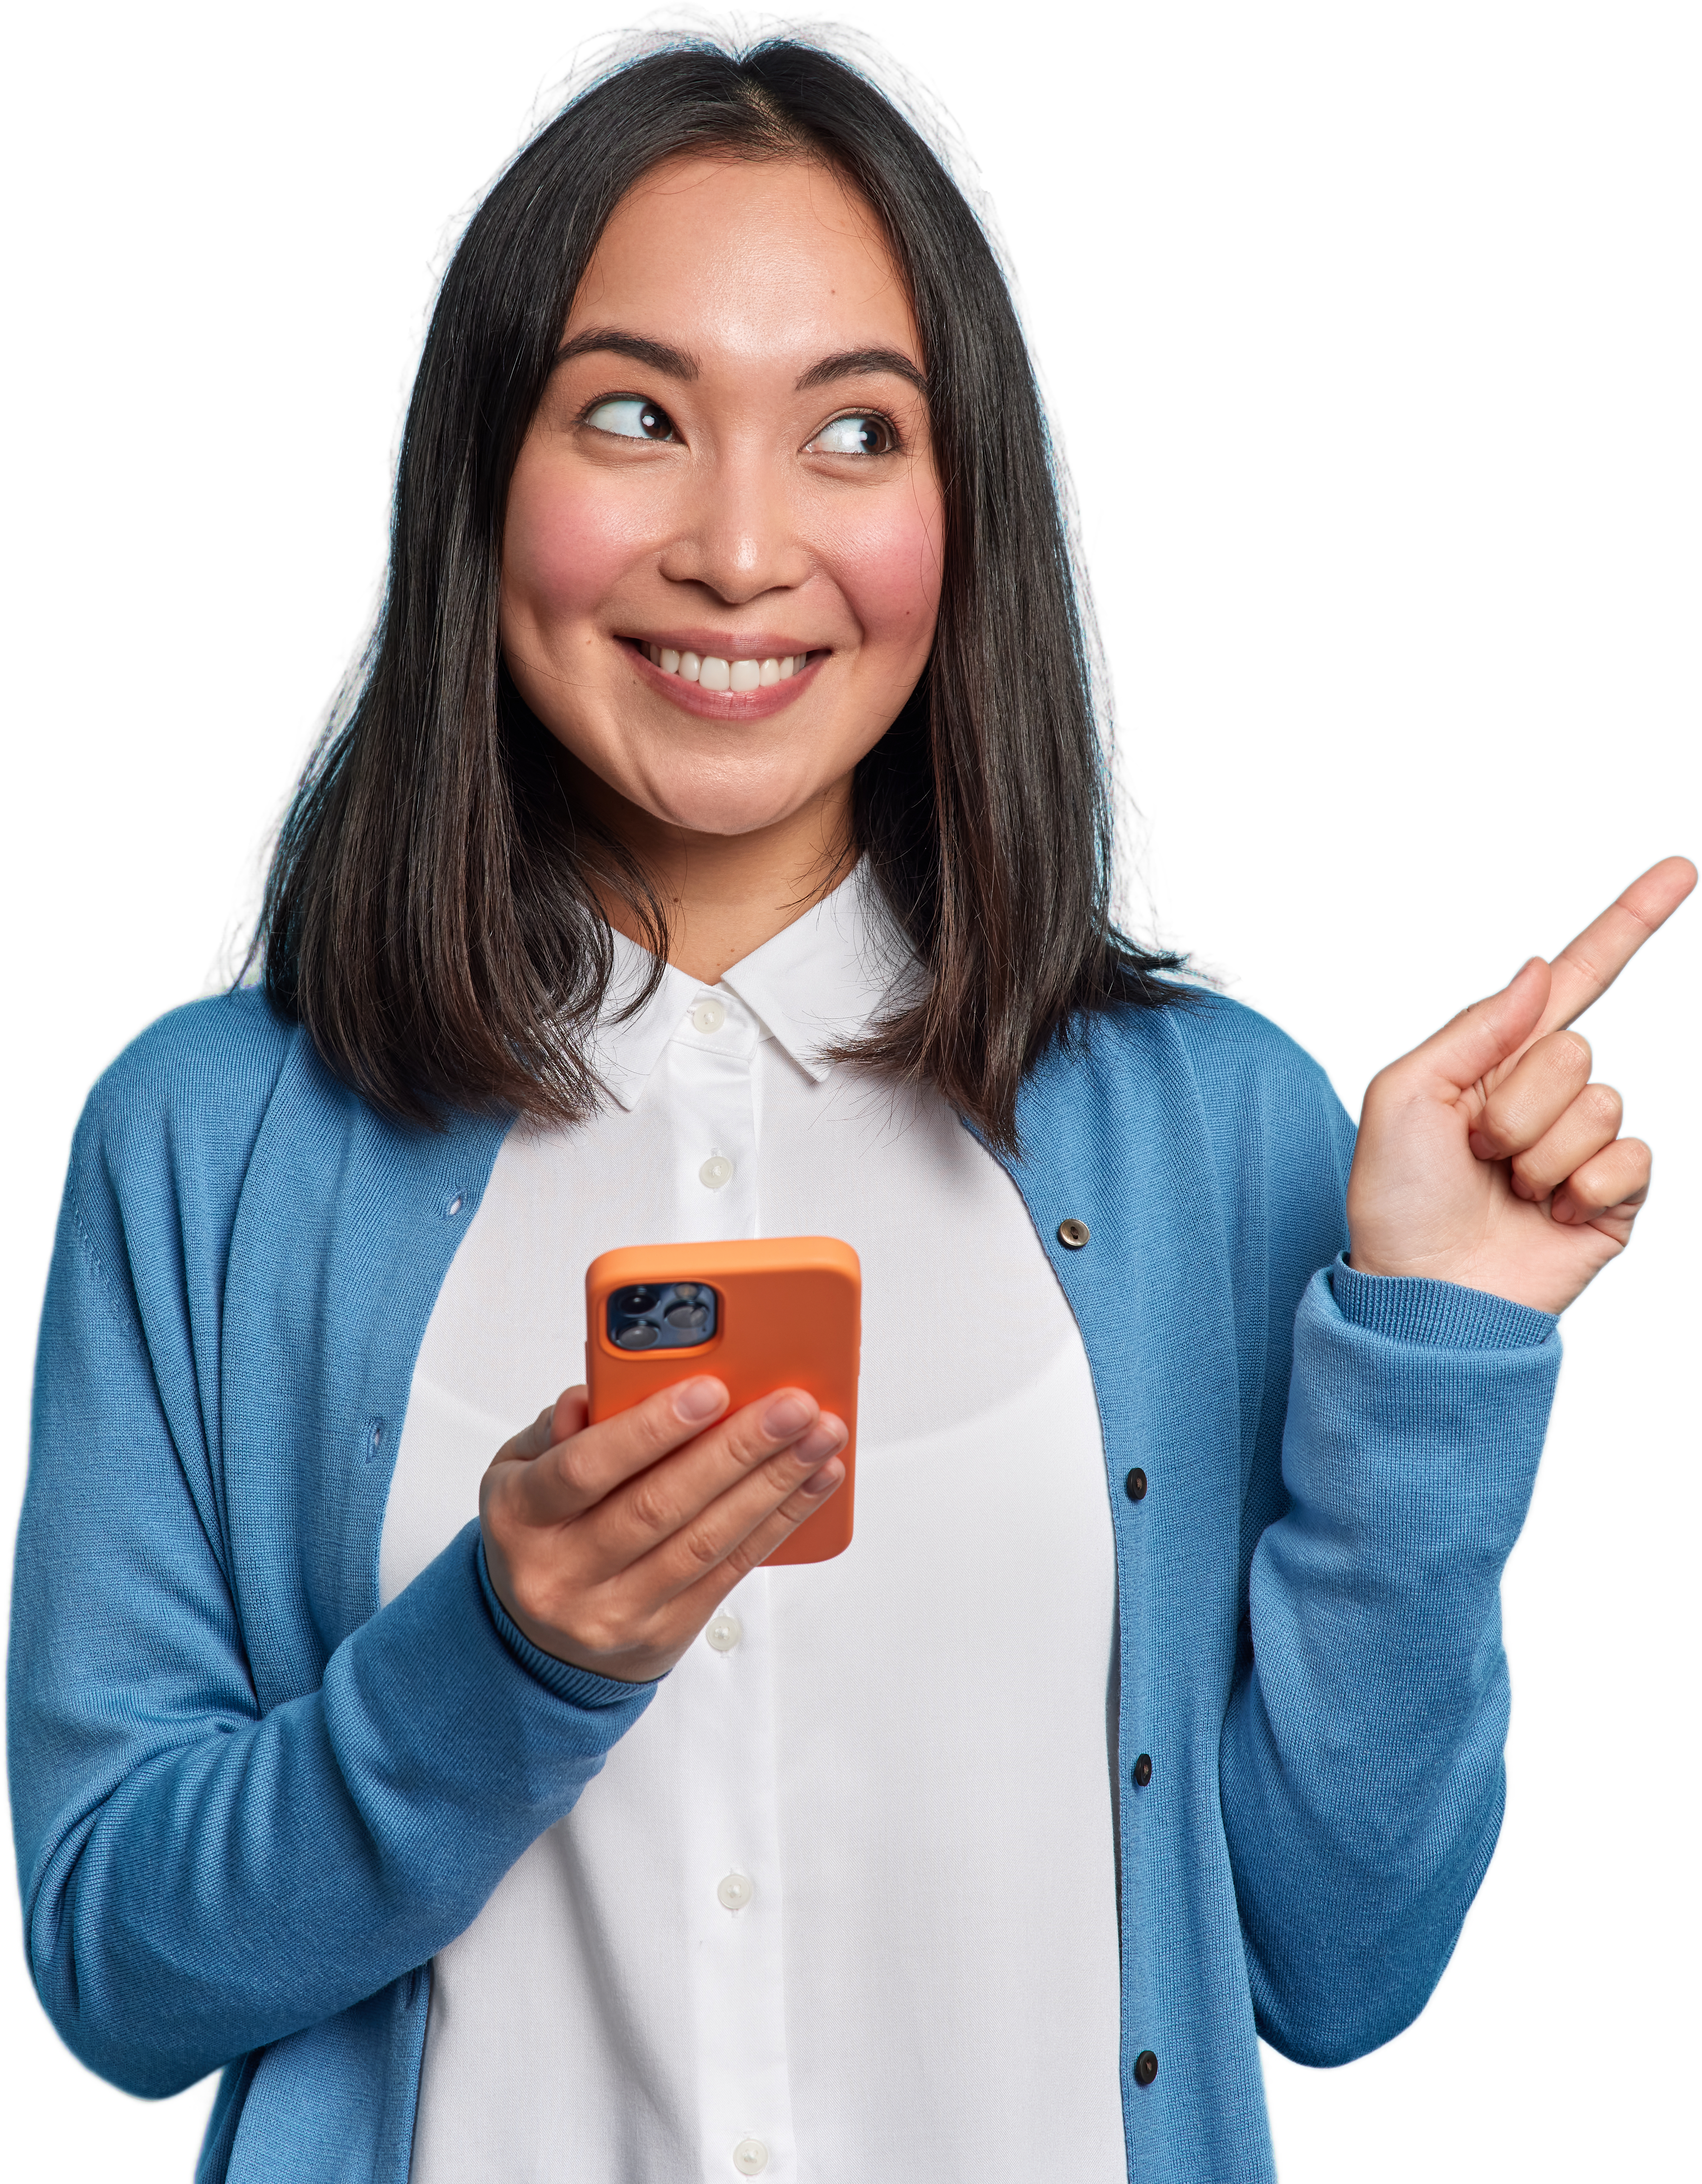 Beautiful Asian woman uses smartphone app sends messages in social media chat points away on copy space wears casual jumper isolated over blue background shows copy space for your advertisement